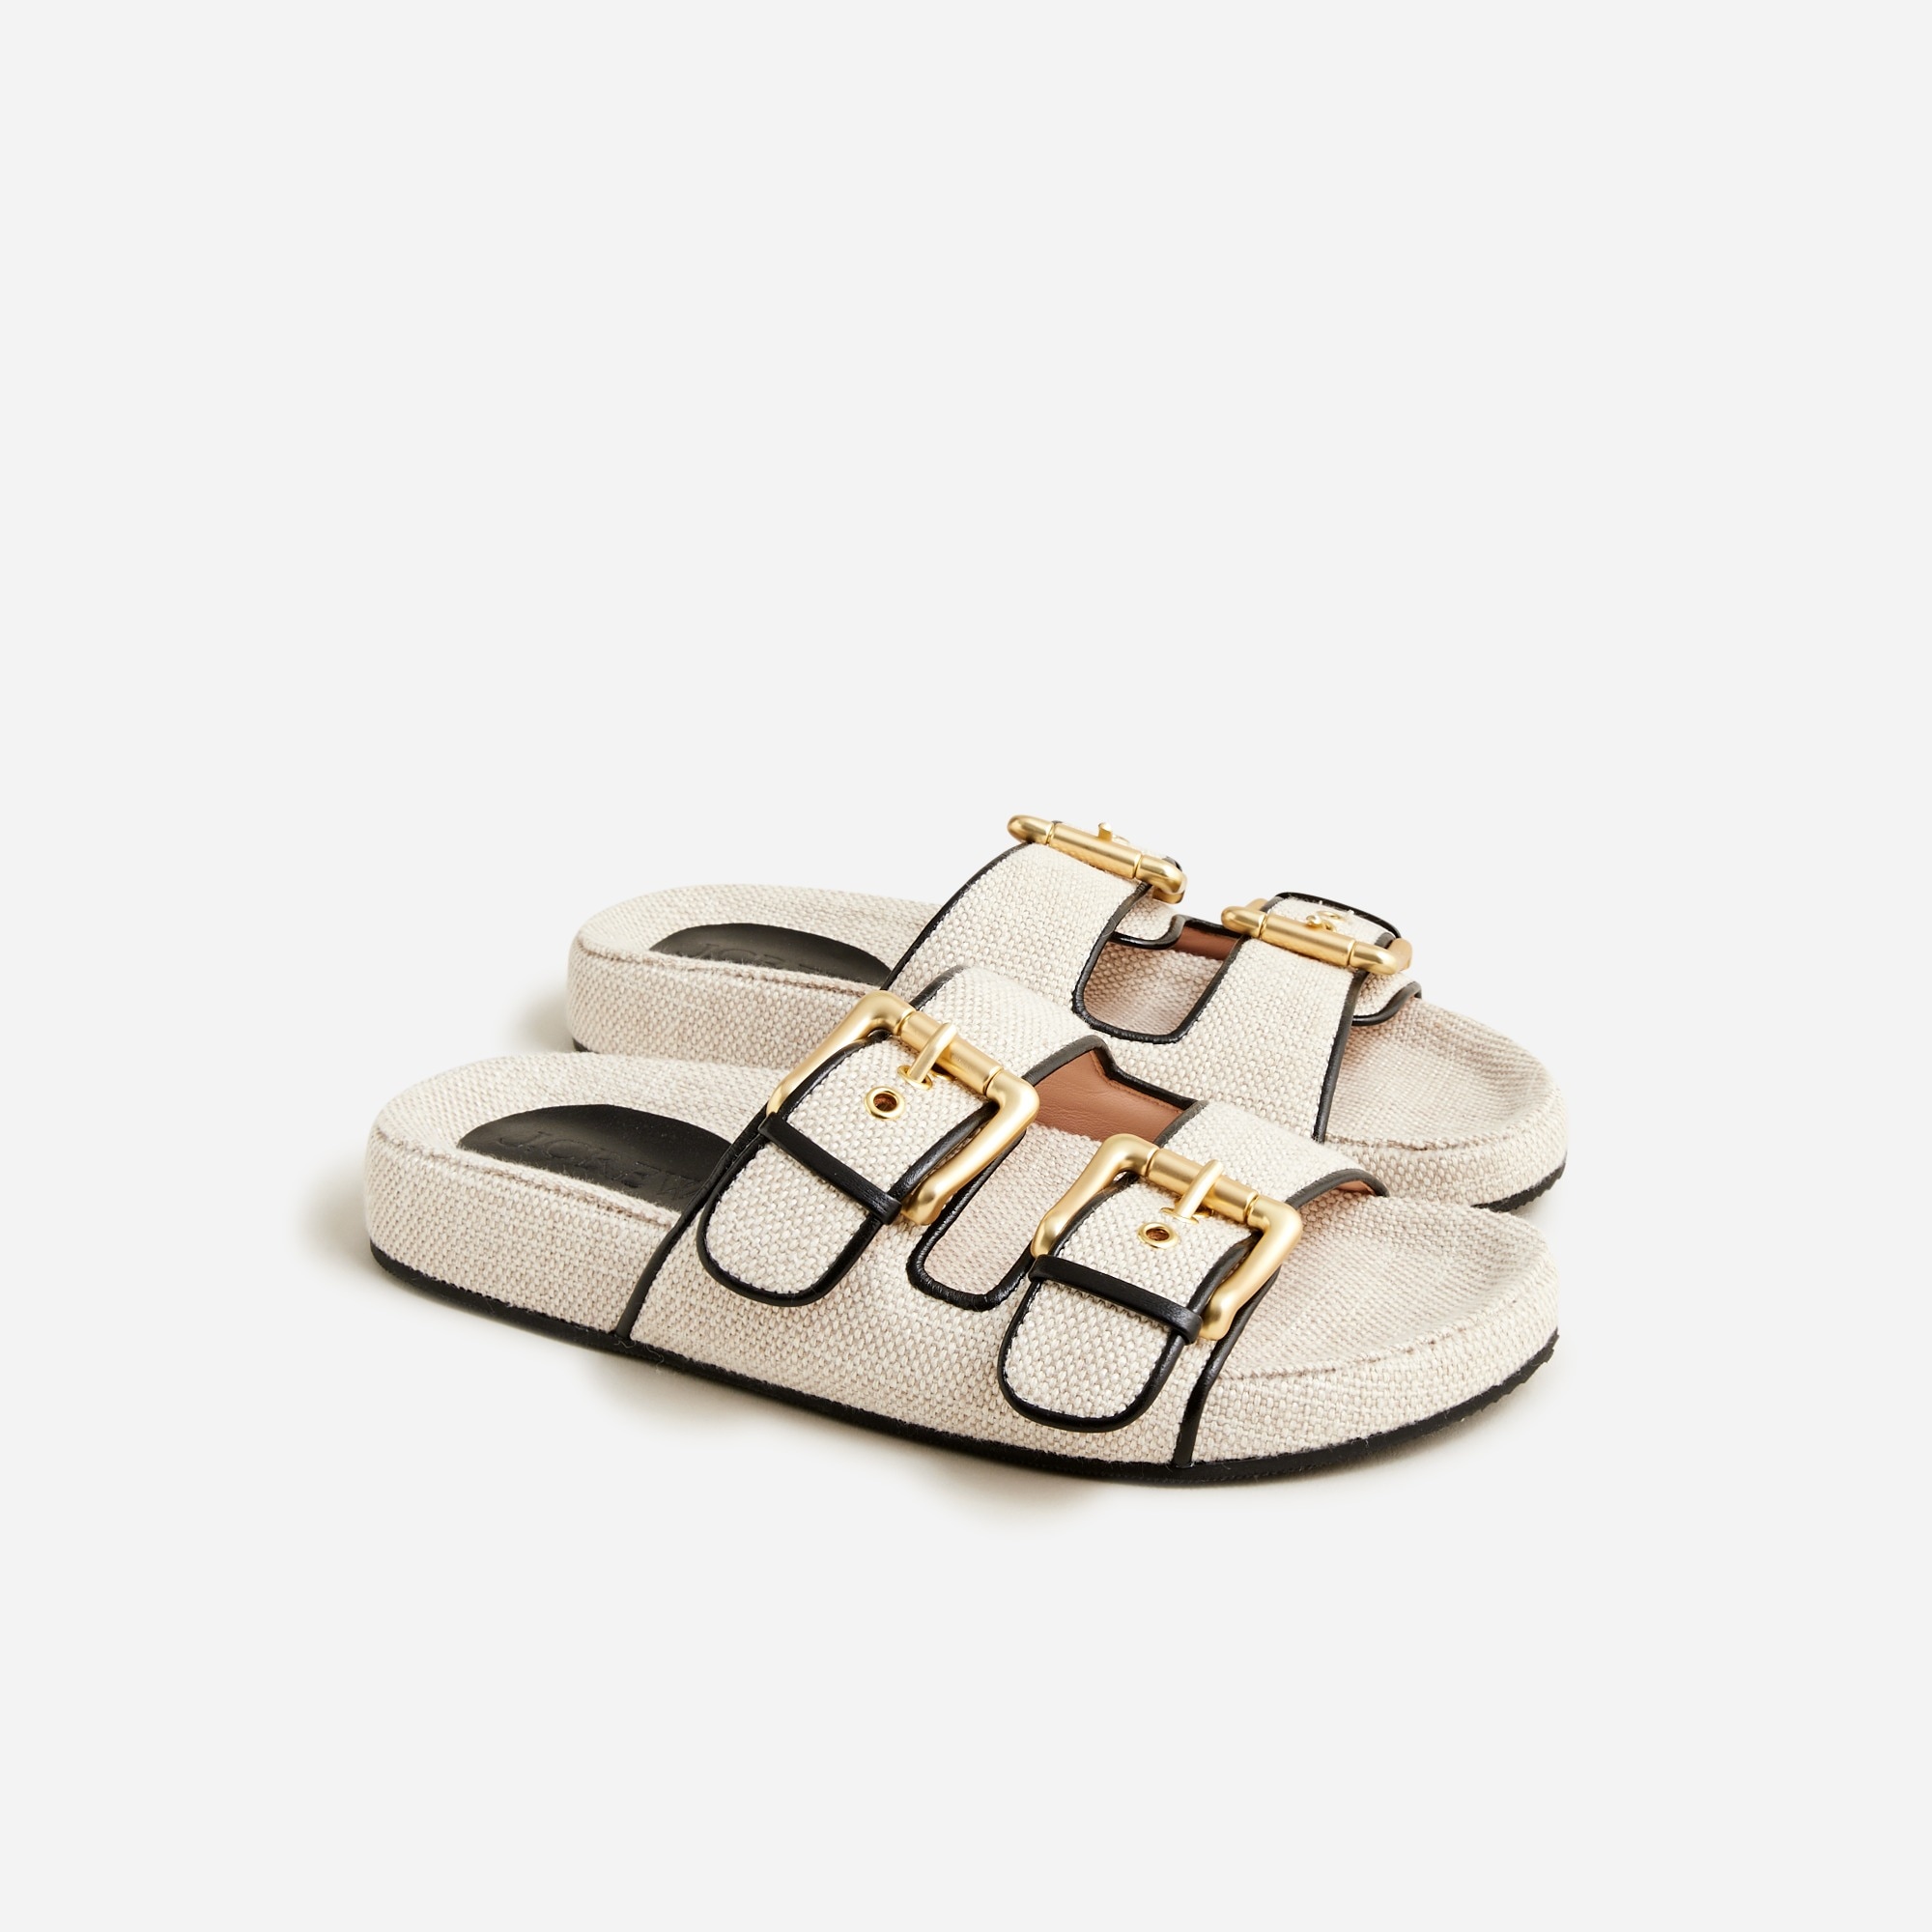 Jcrew Marlow sandals in croc-embossed leather